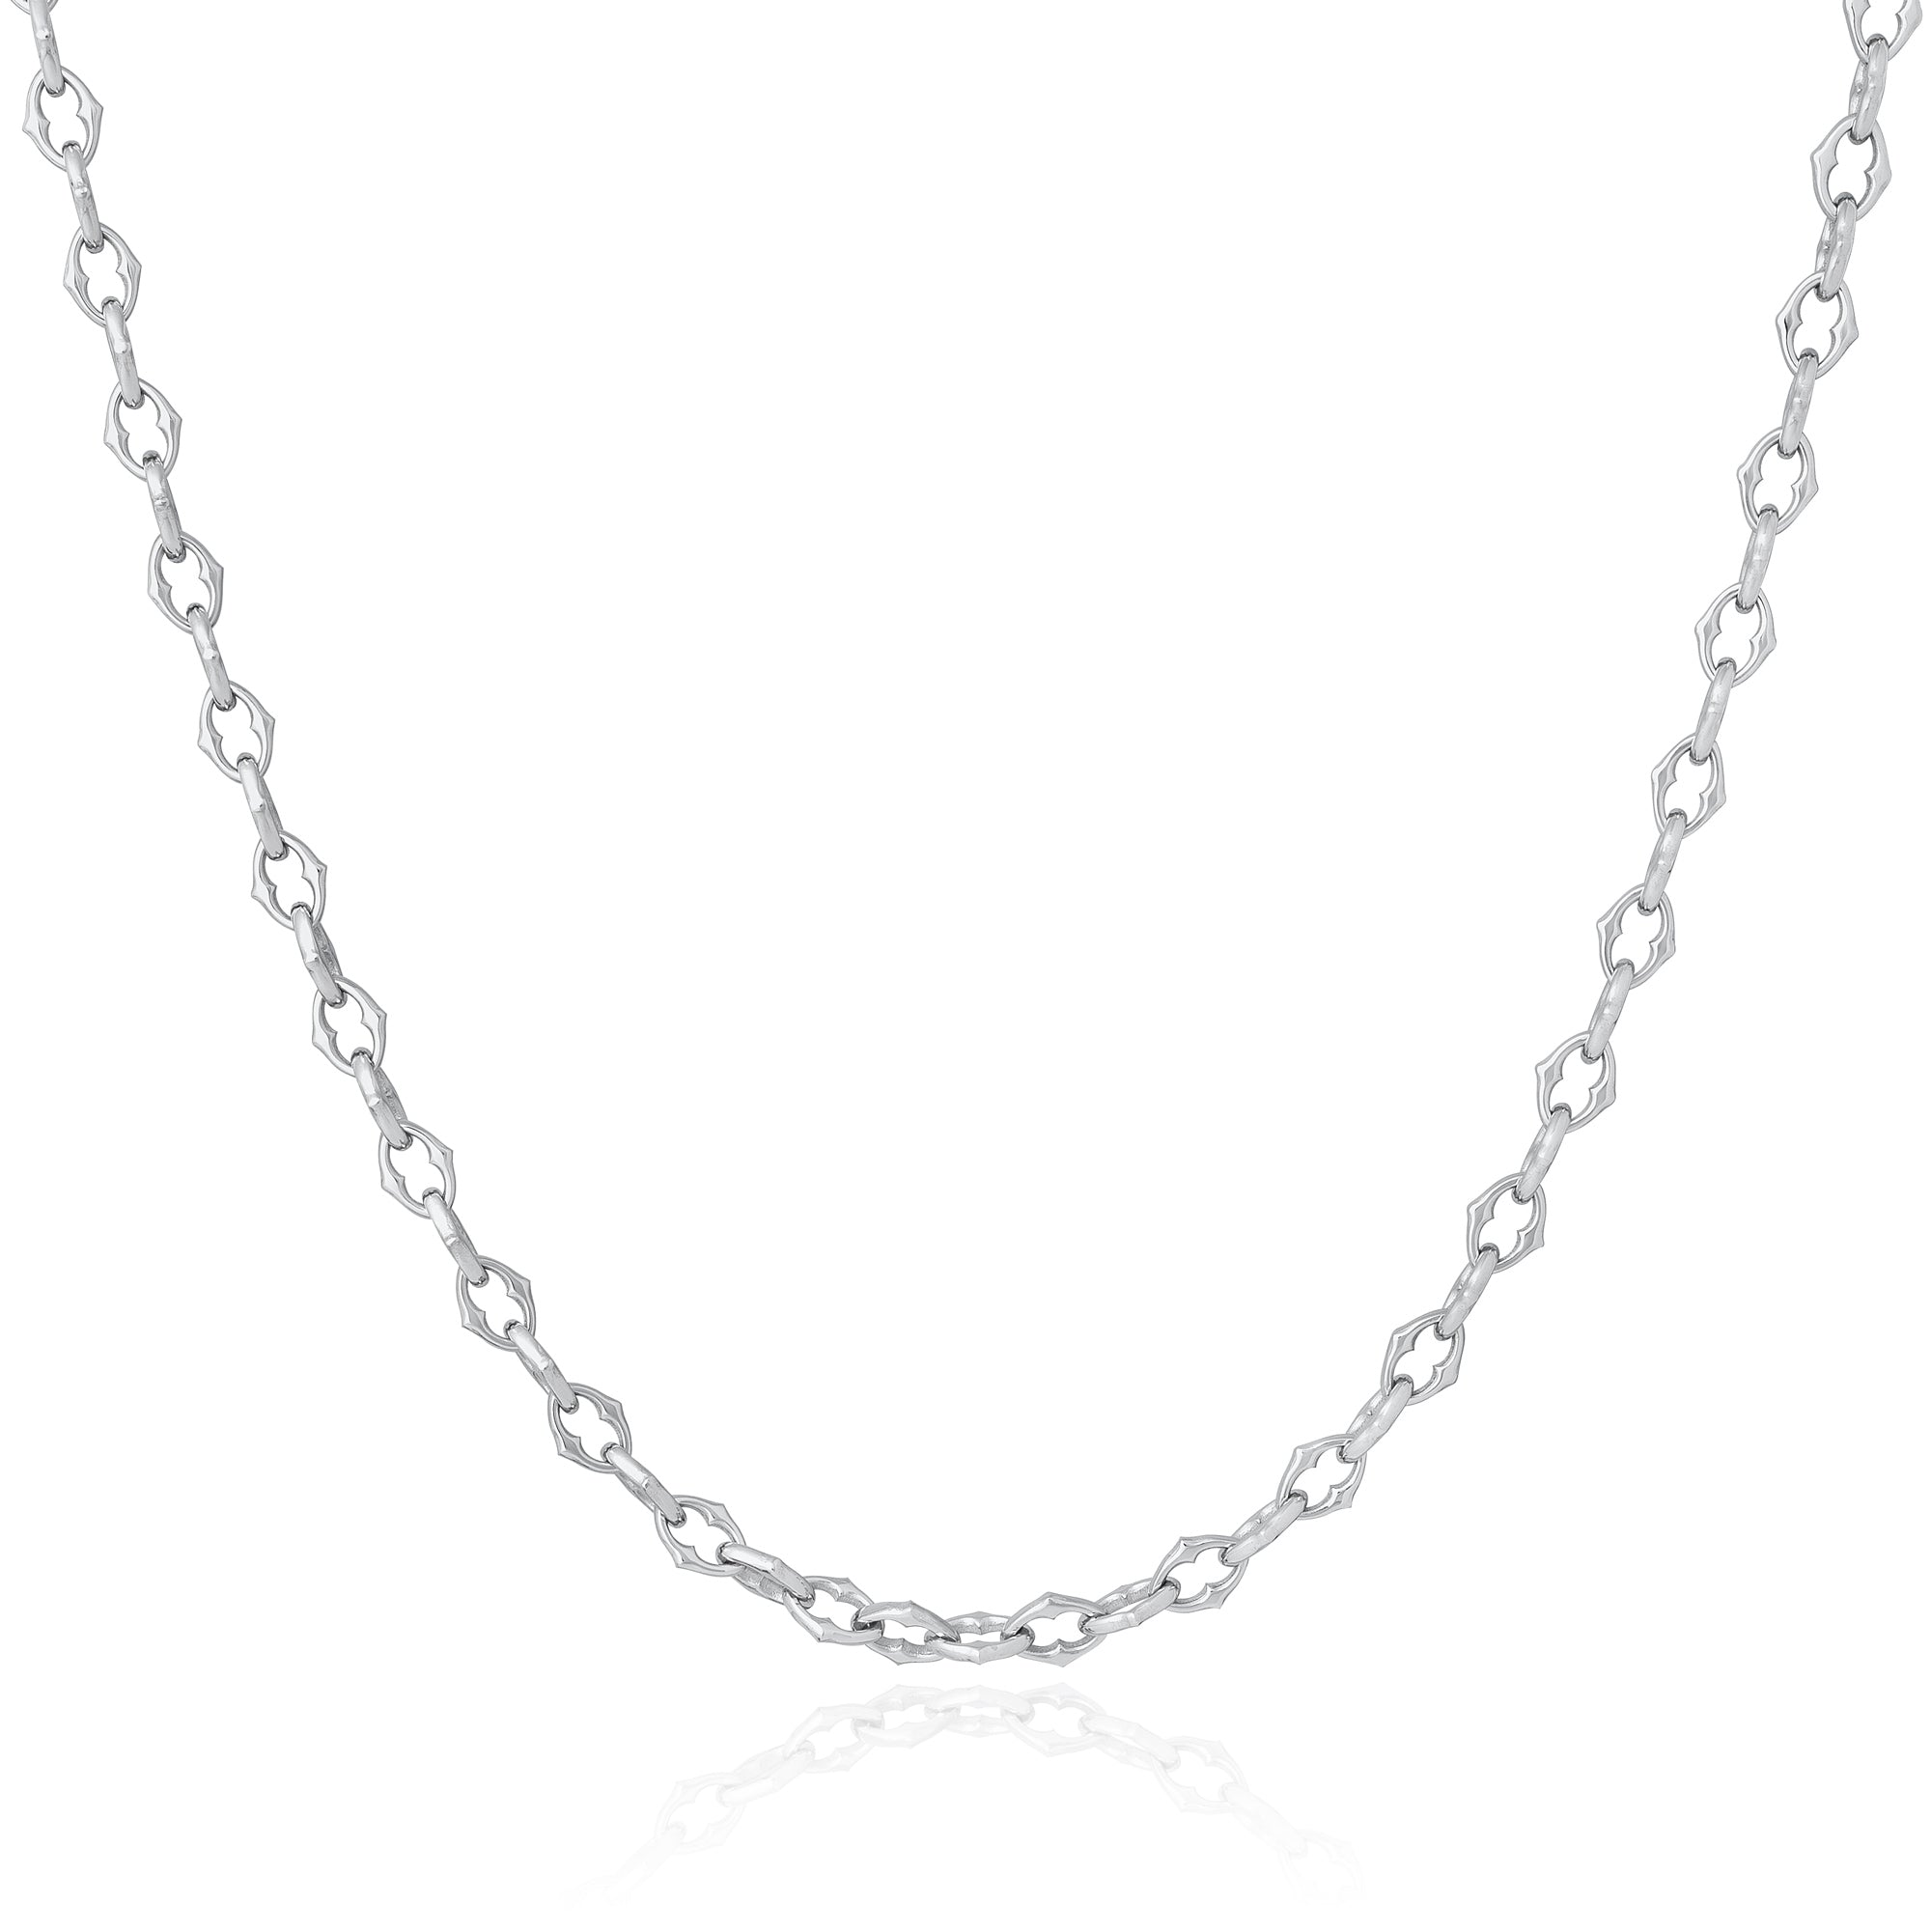 dainty Spiked link necklace on white background